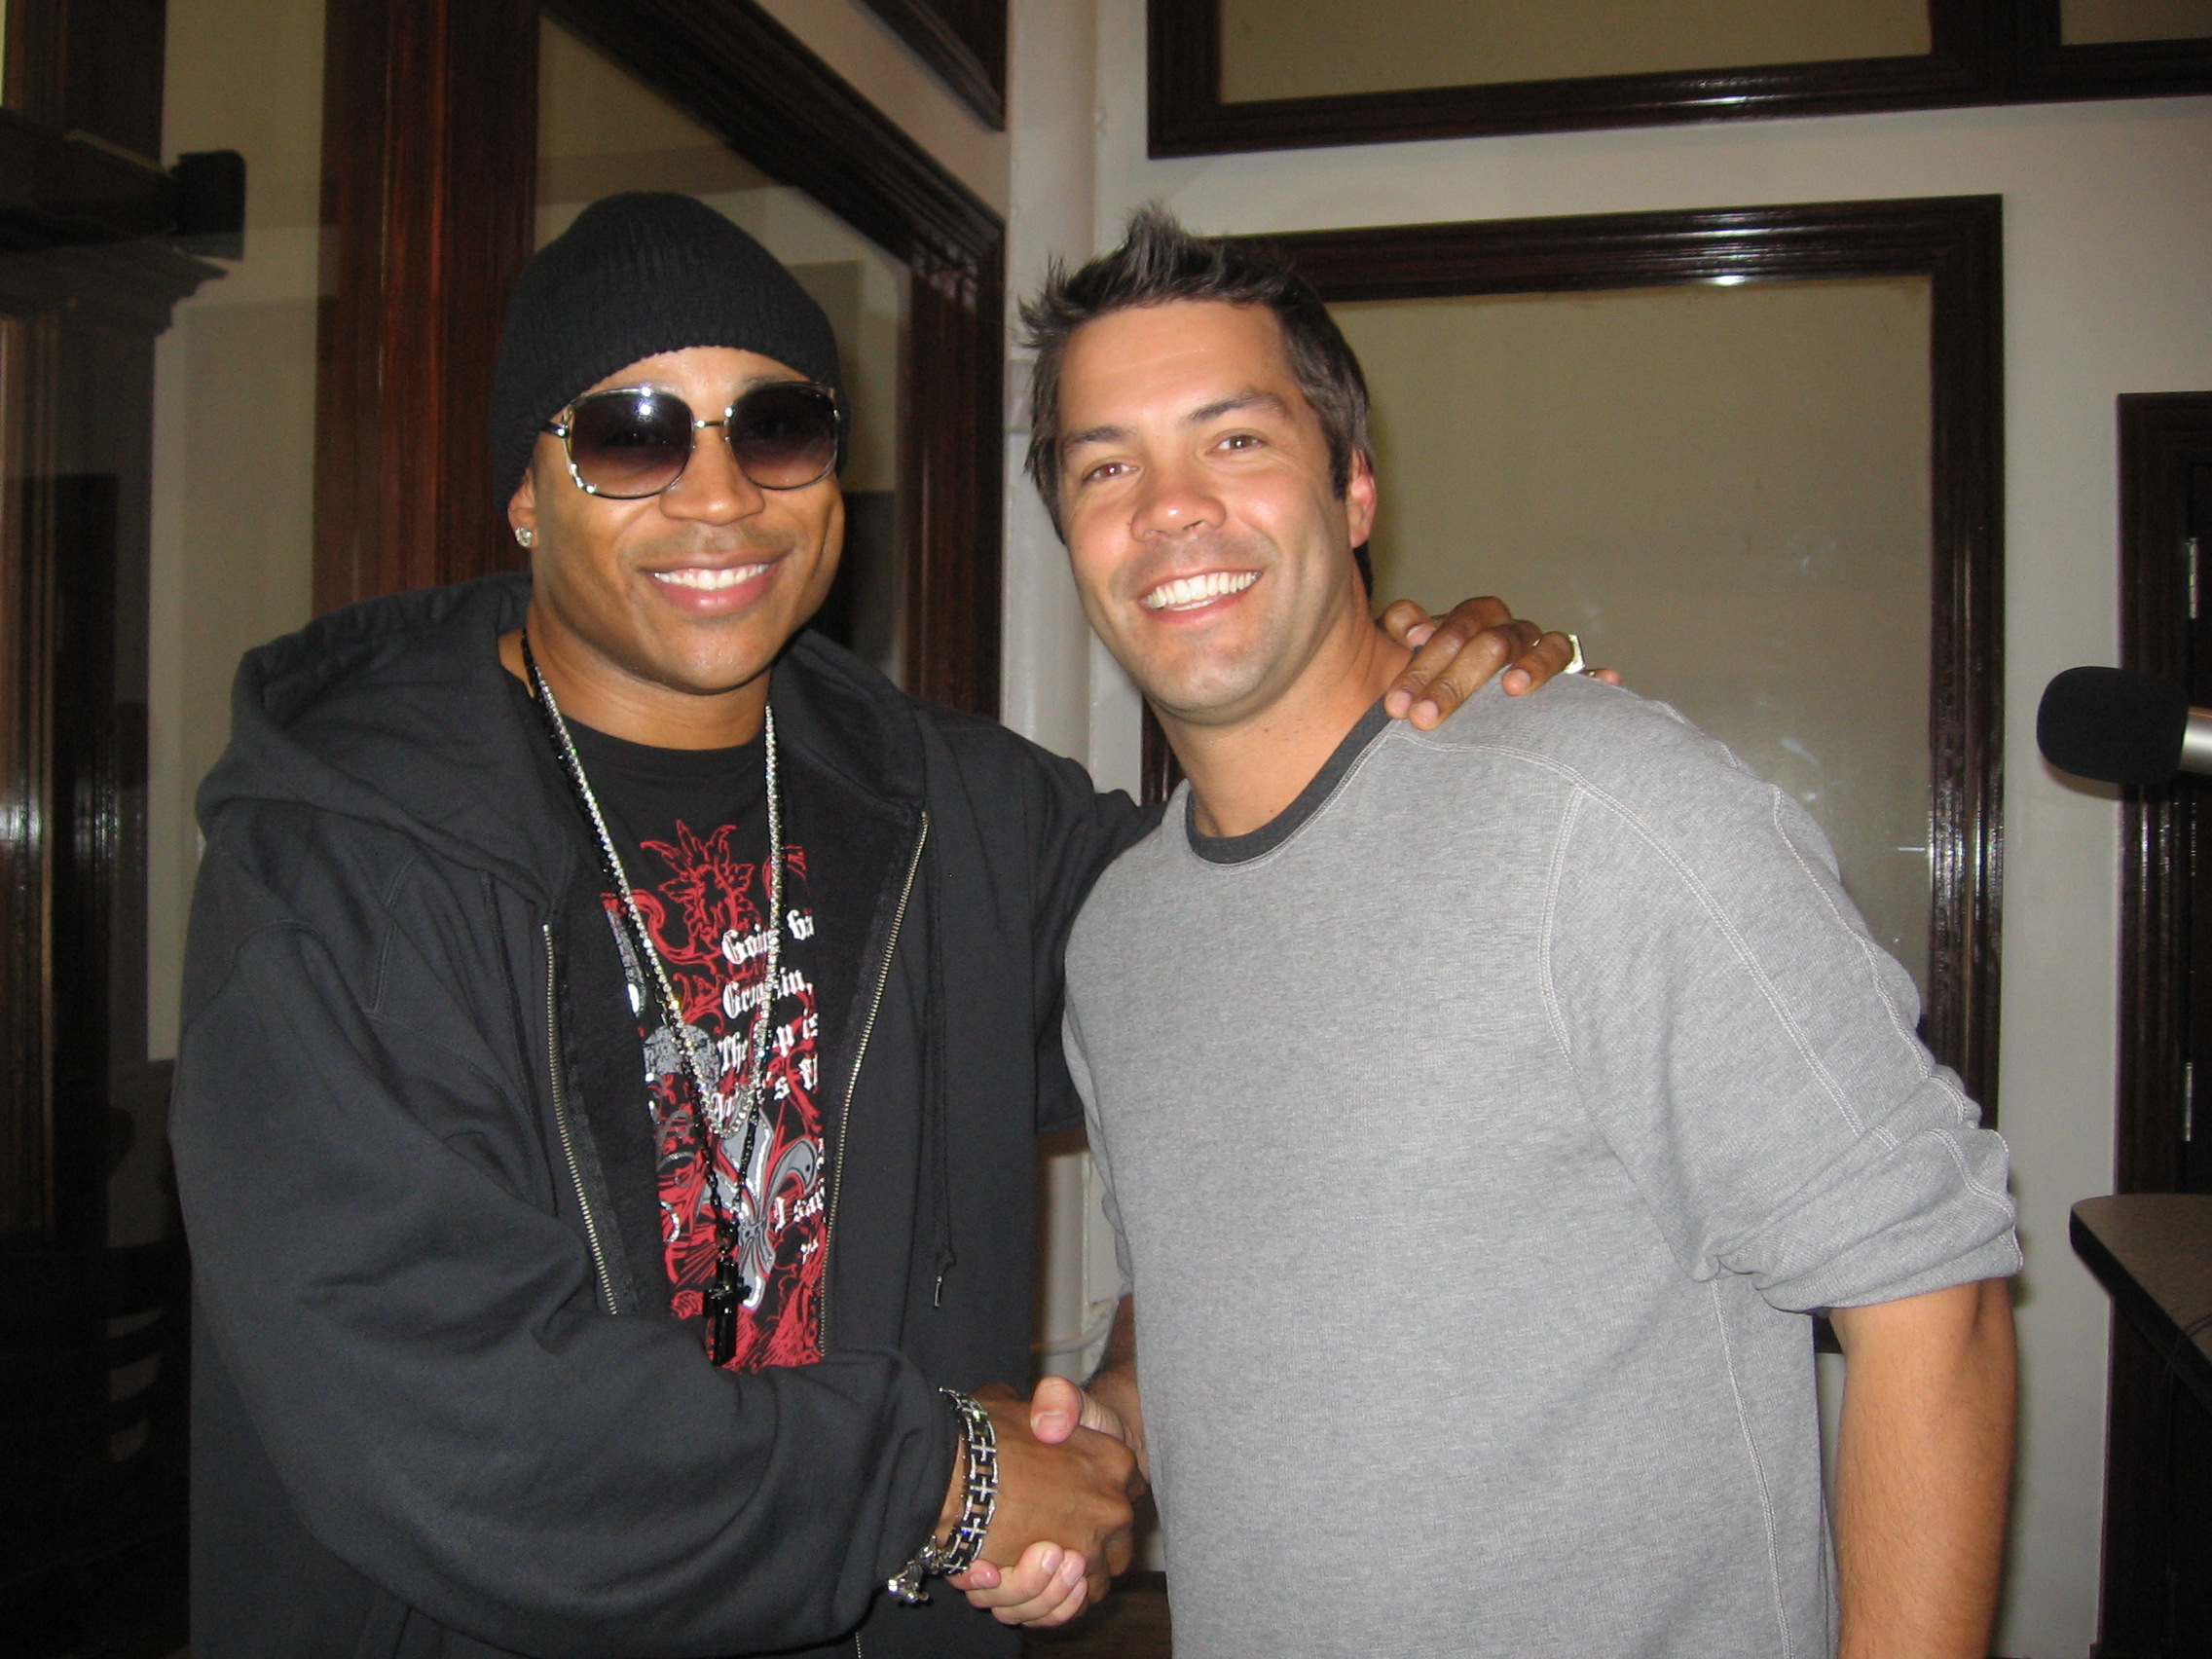 Mark Nilsson with LL Cool J during an appearance on the Mancow Show